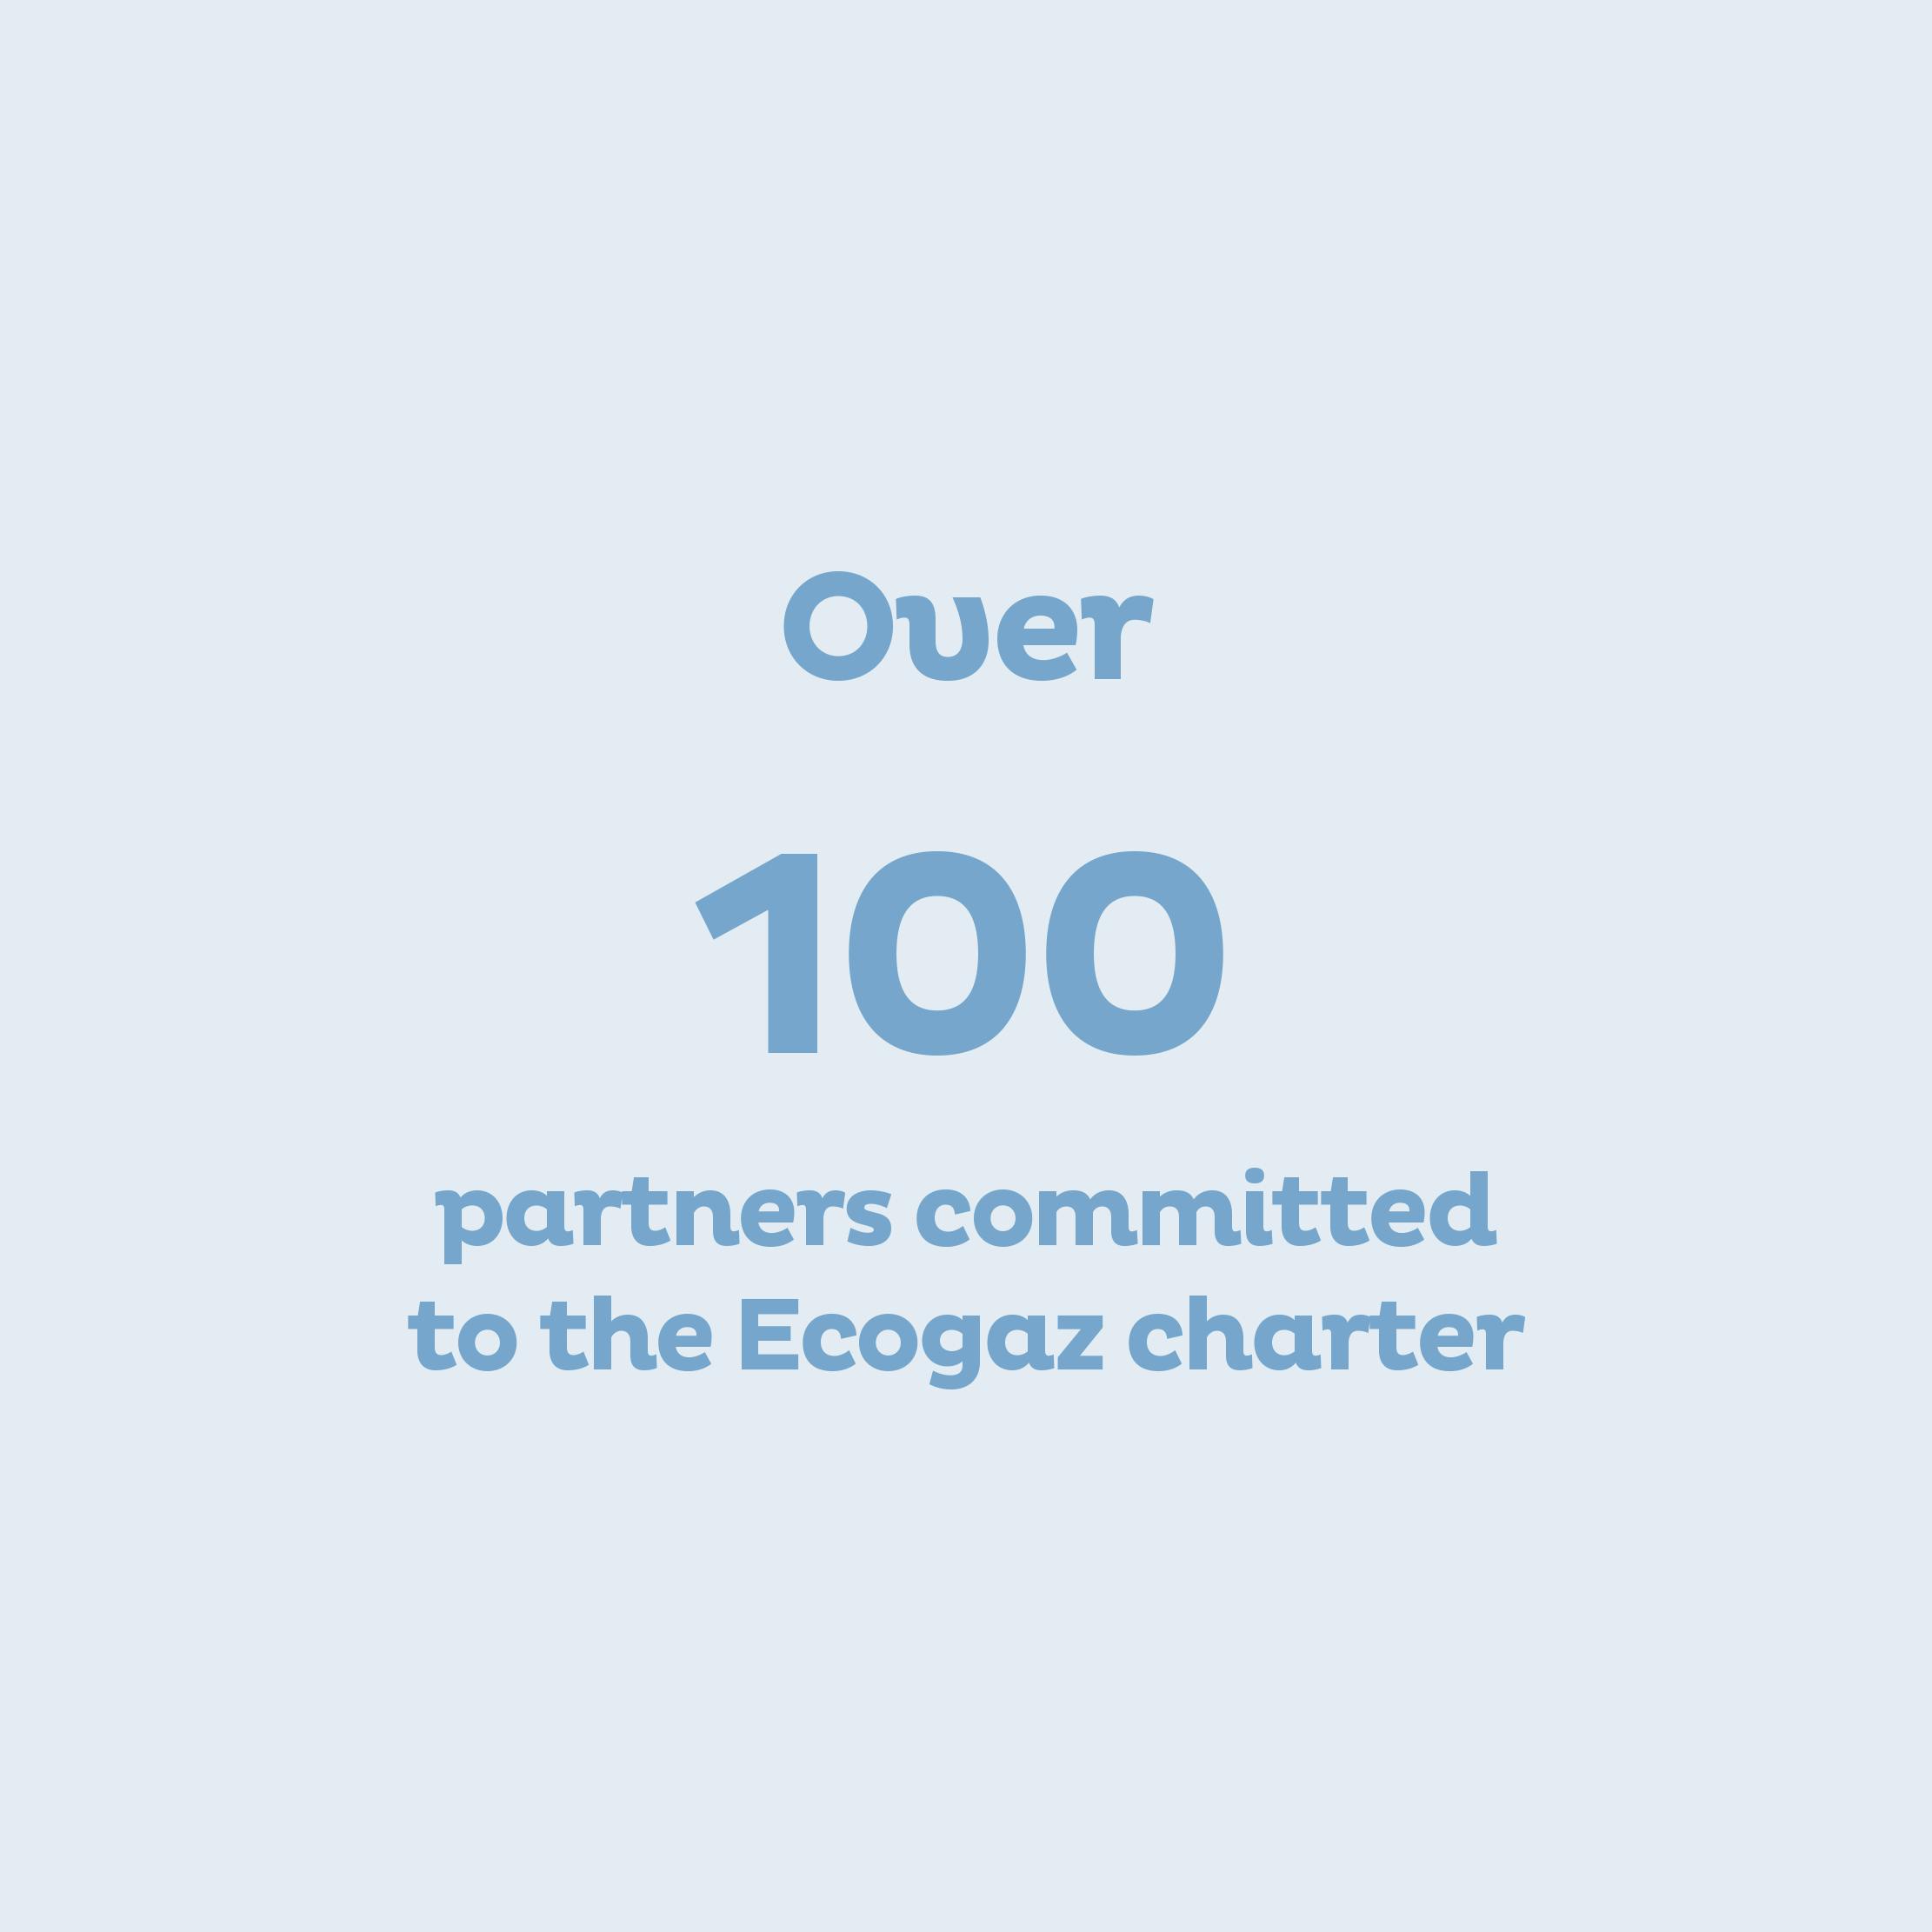 Over 100 partners committed to the Ecogaz charter